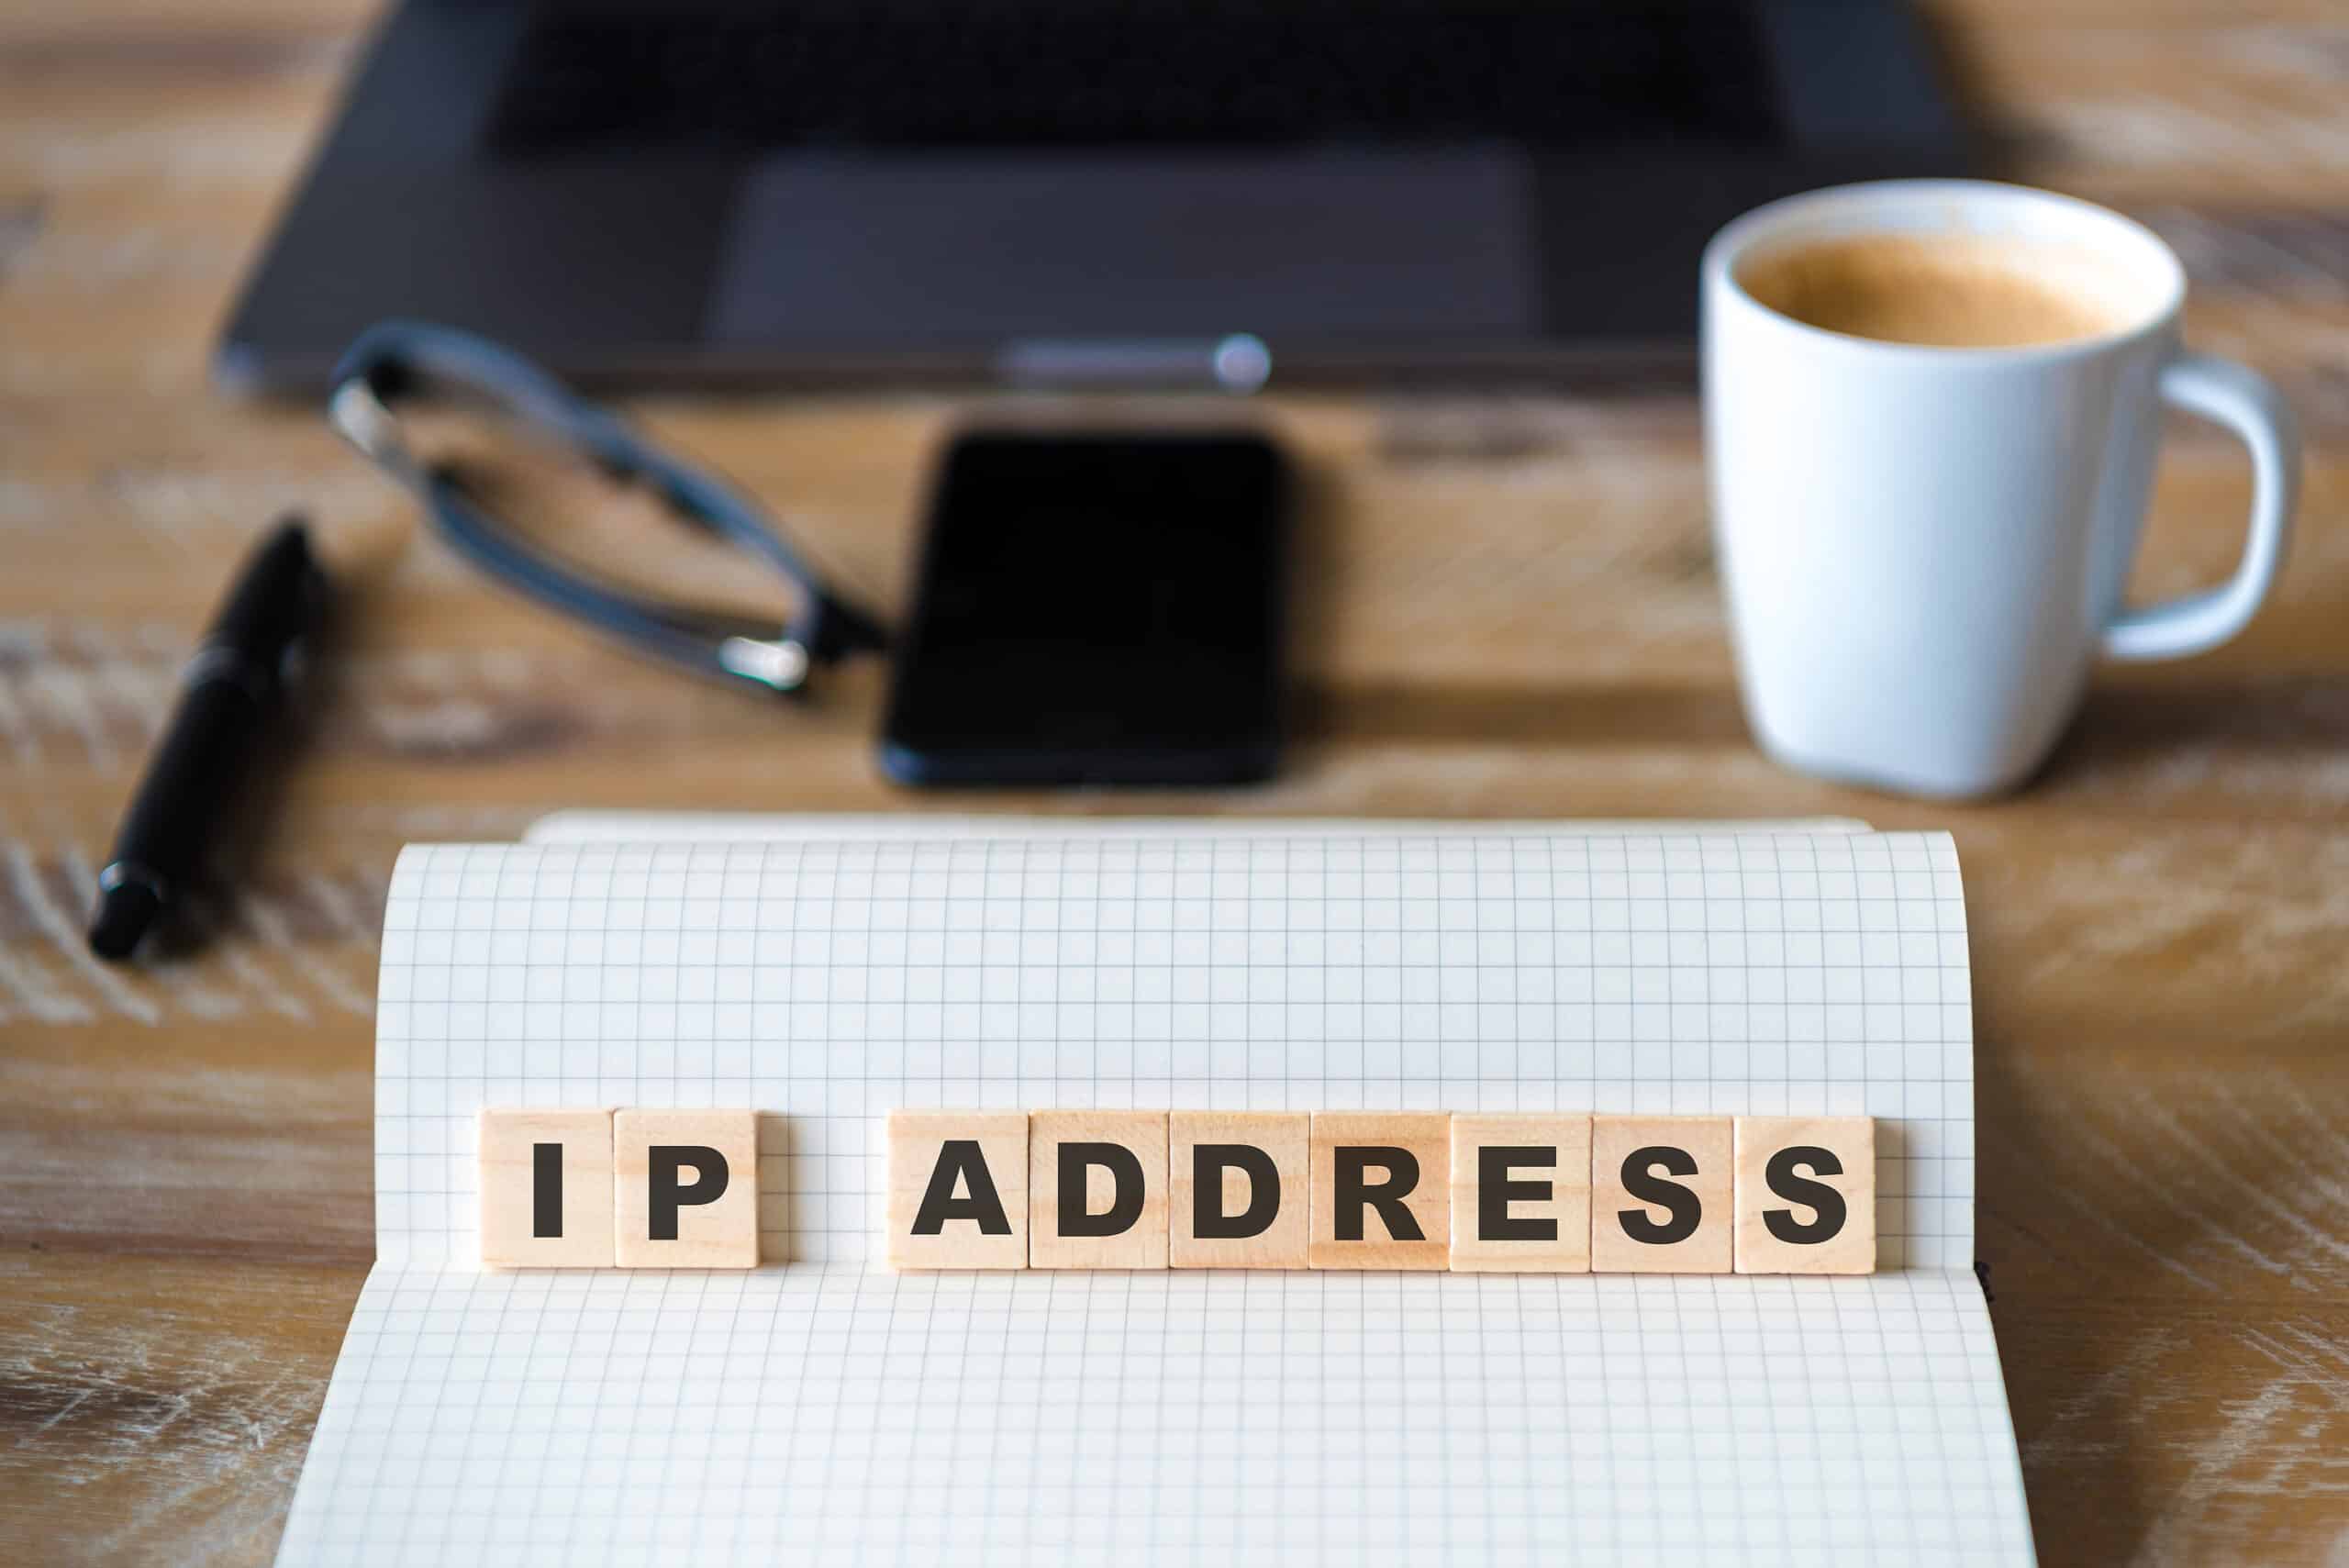 How an IP Address is Used to Locate & Track You Online